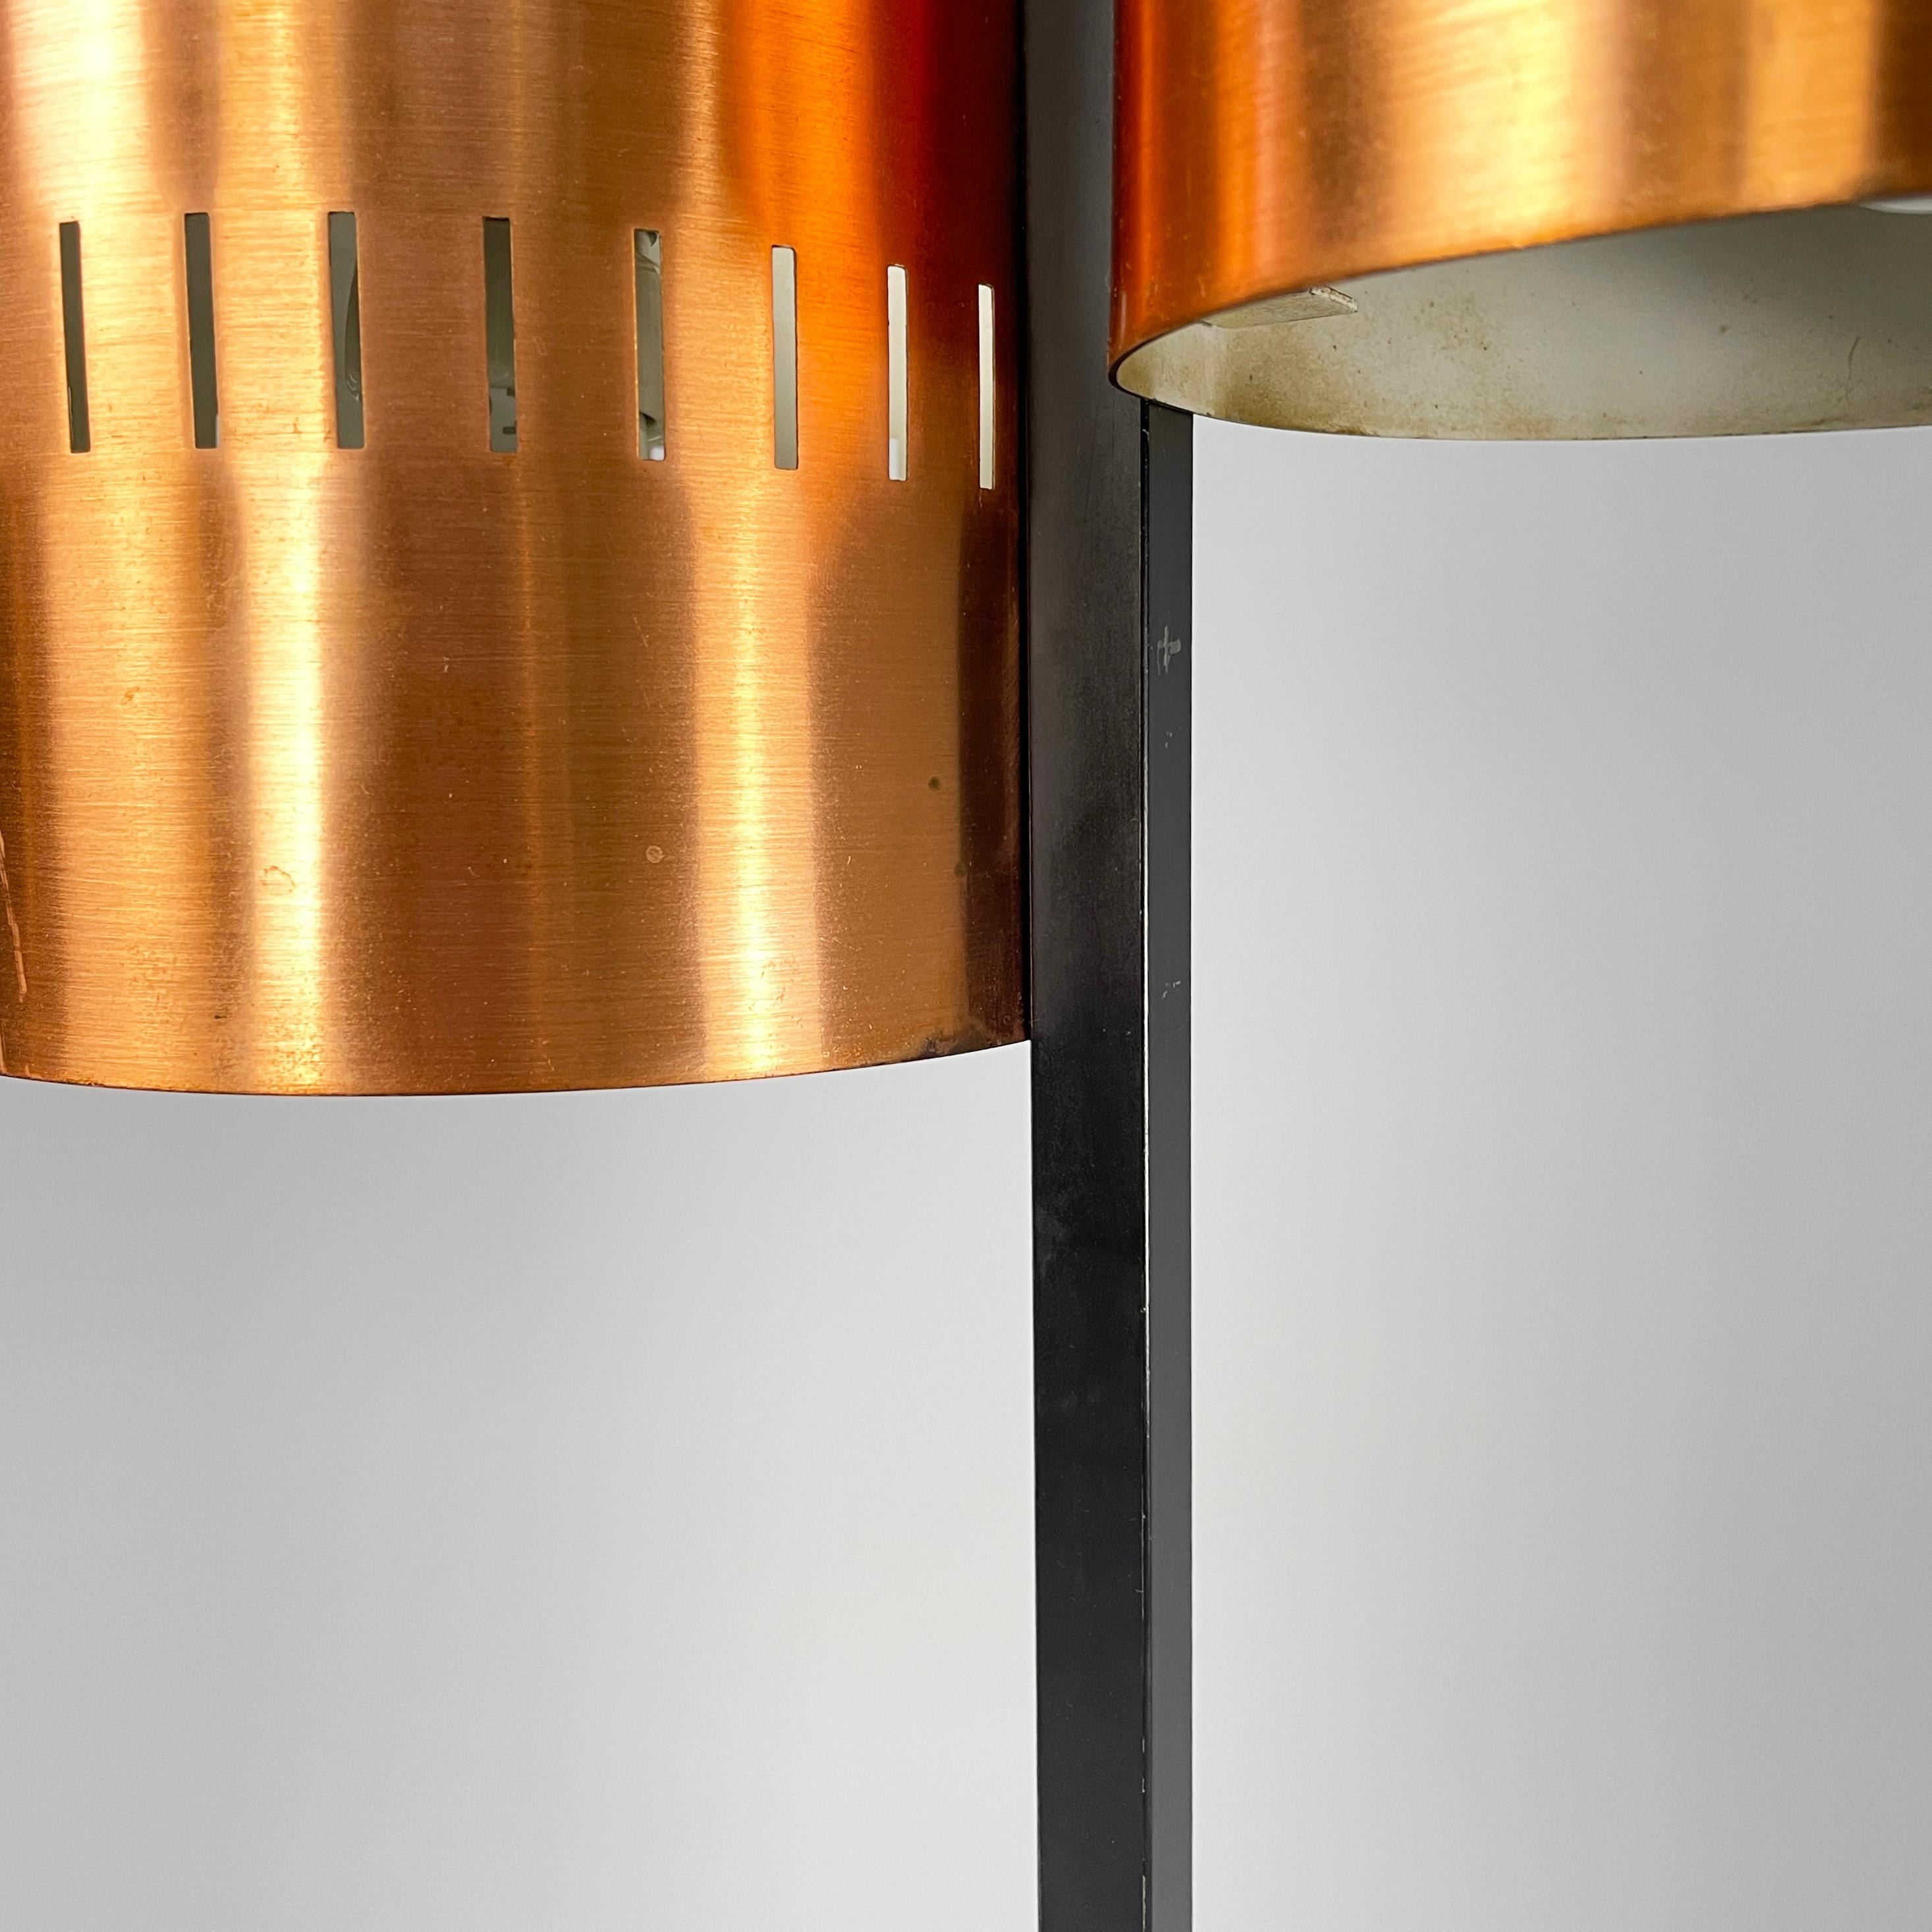 Italian mid-century modern Floor lamp in copper, black metal and marble, 1960s For Sale 6